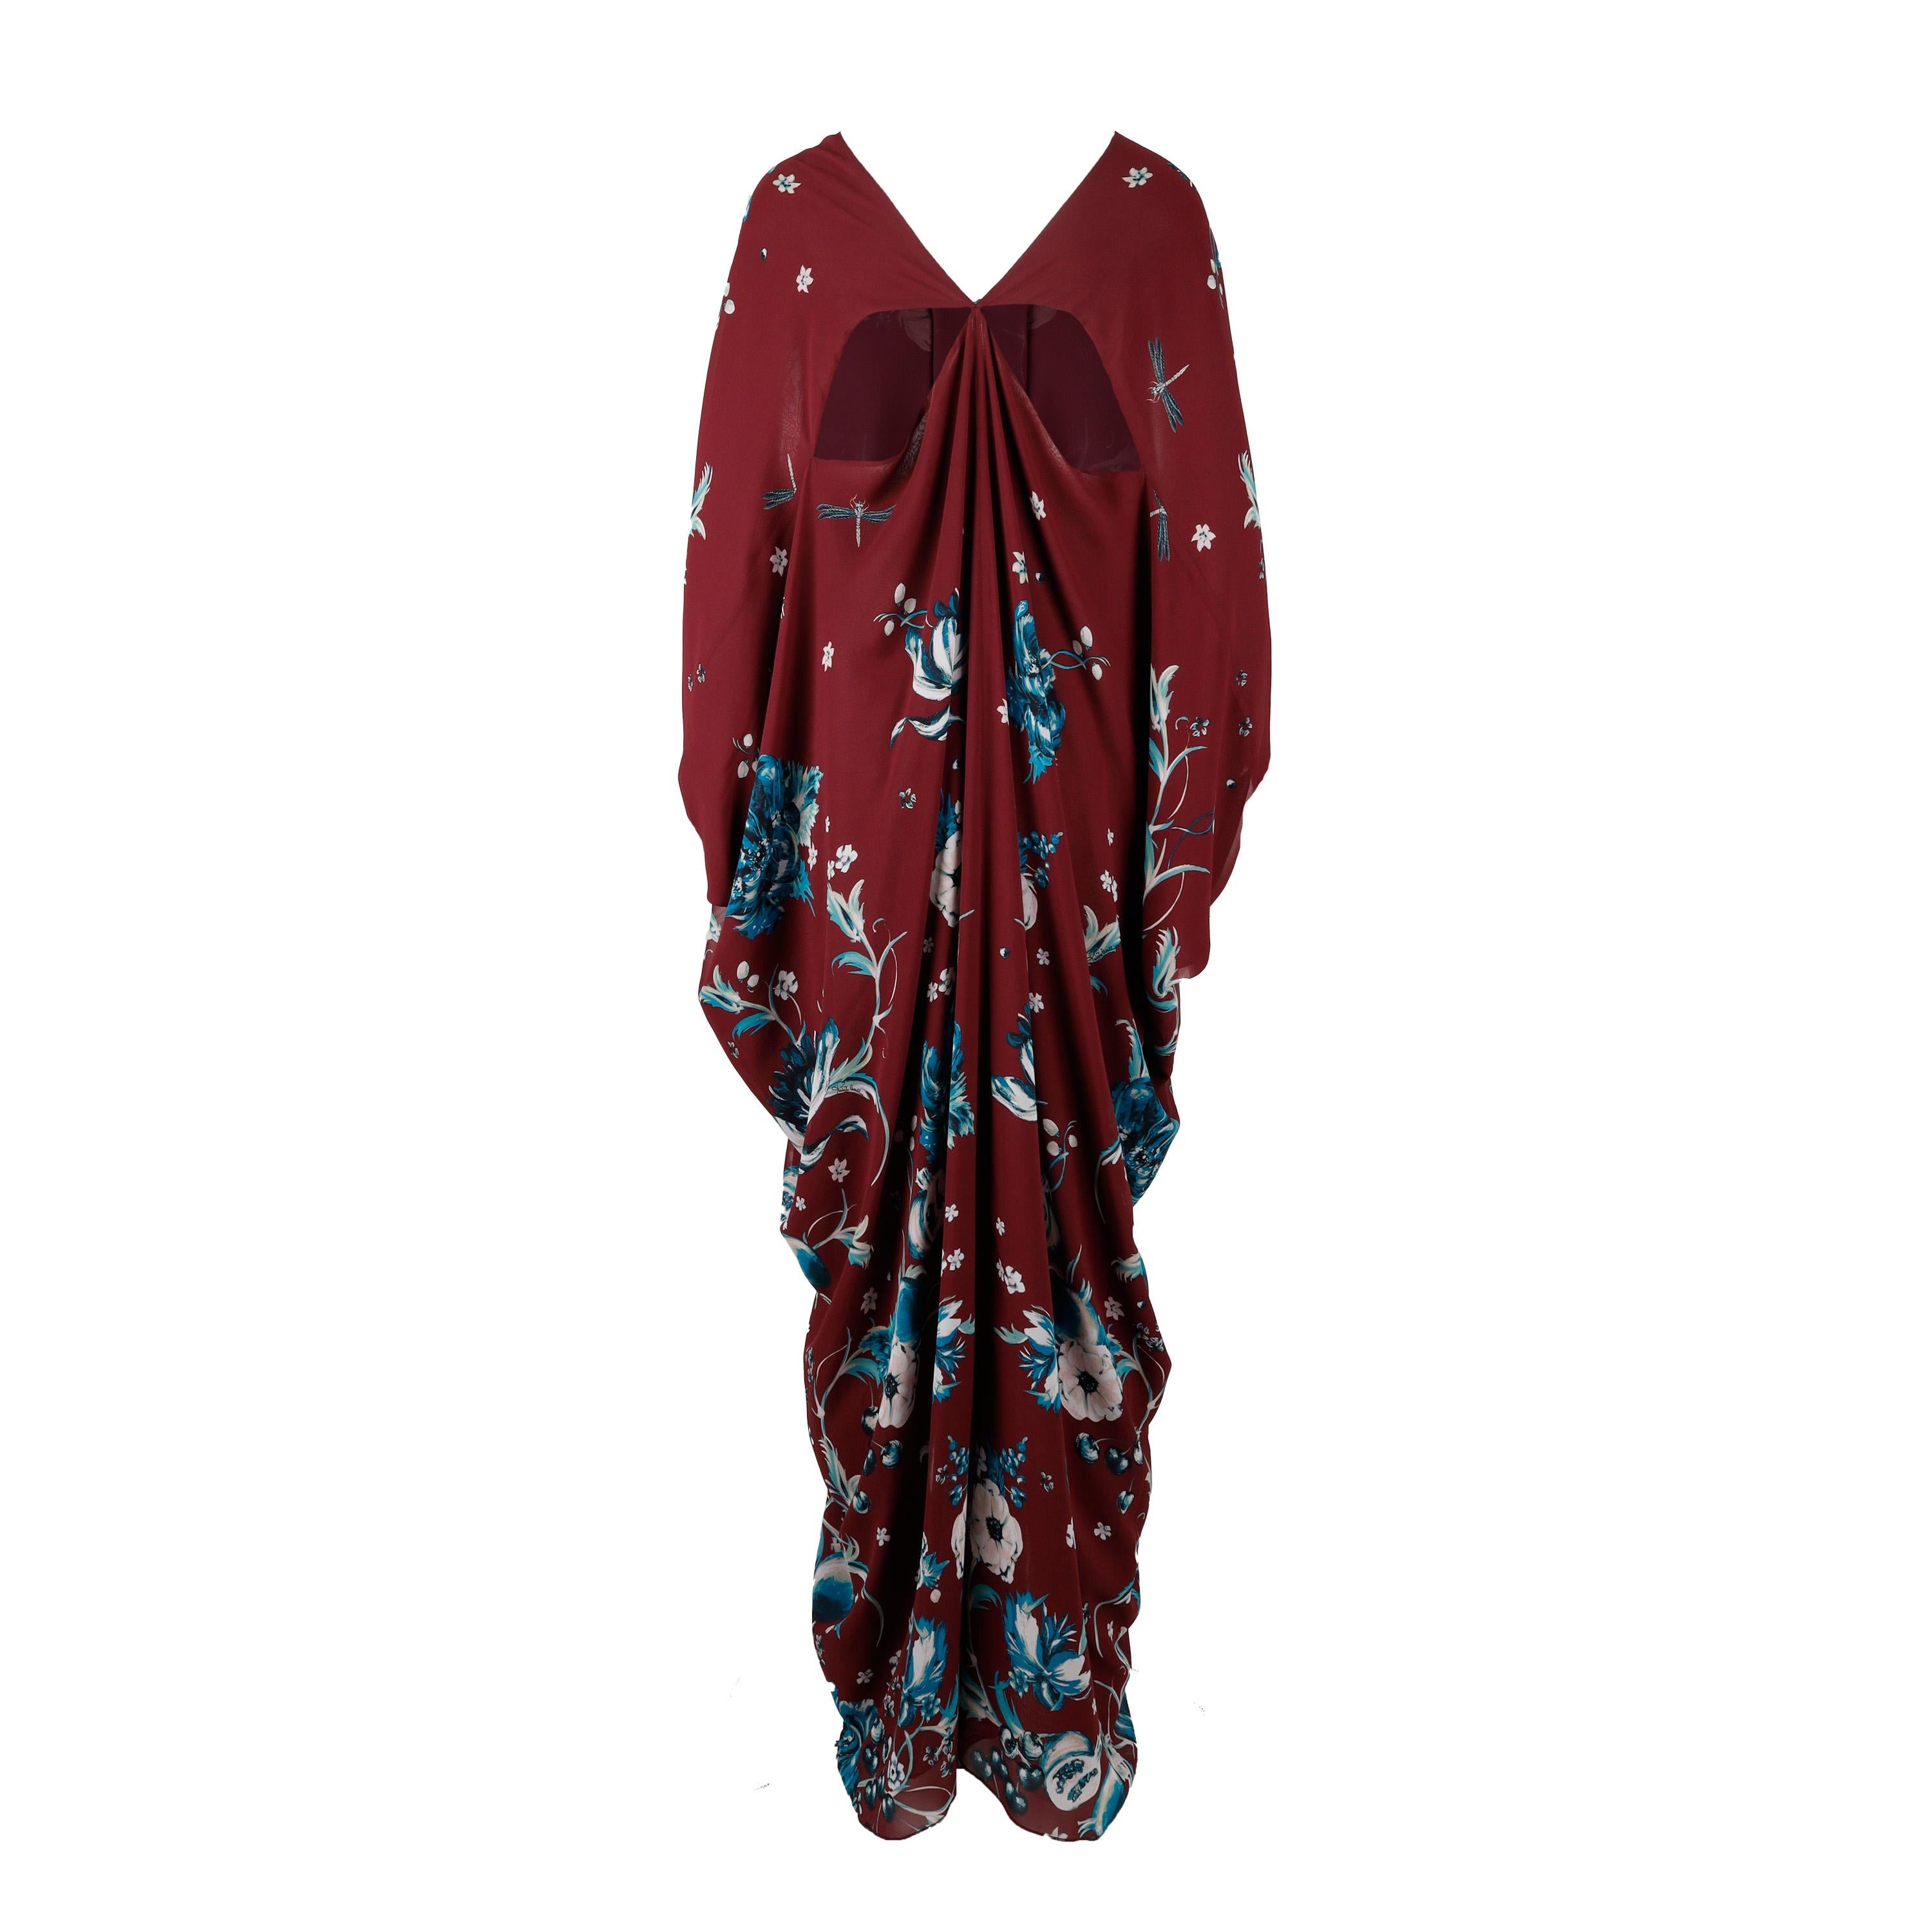 This Roberto Cavalli Silk Kaftan Dress features a beautiful floral print with turquoise accents in burgundy, set off by cutout accents. It boasts a loose kimono sleeve and a v-neck, making it the perfect summer wear.